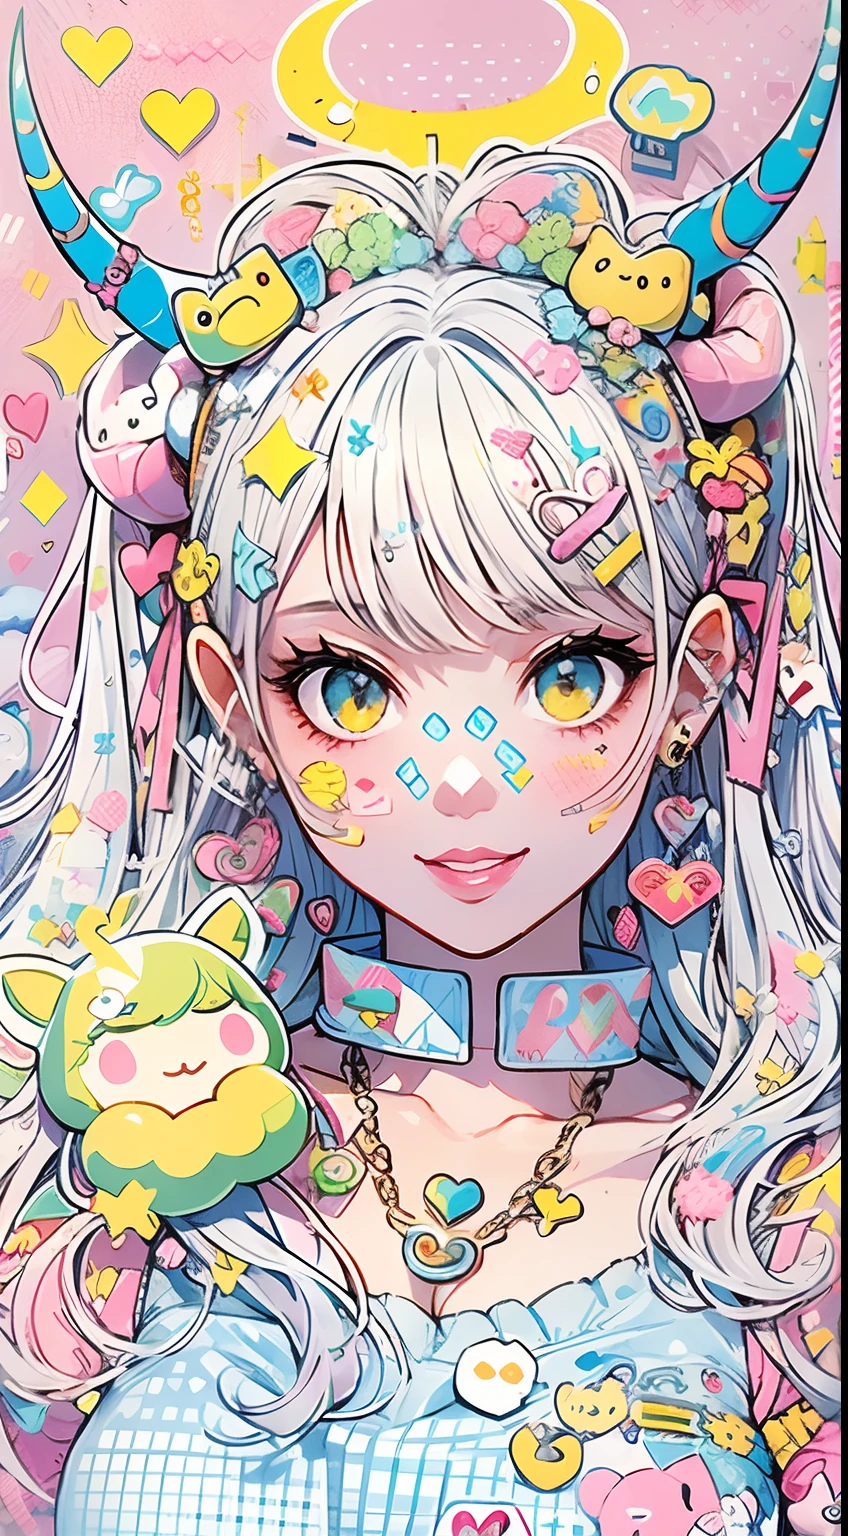 "kawaii, cute, adorable woman with pink, yellow, and baby blue color scheme. She is dressed in sky-themed clothes made out of clouds and sky motifs. Her outfit is fluffy and soft, with decora accessories like hairclips. She embodies the vibrant and trendy Harajuku fashion style." horns, demon wings, big ,big ass, big lips, juicy lips, huge hair, smile, mature, adult, master